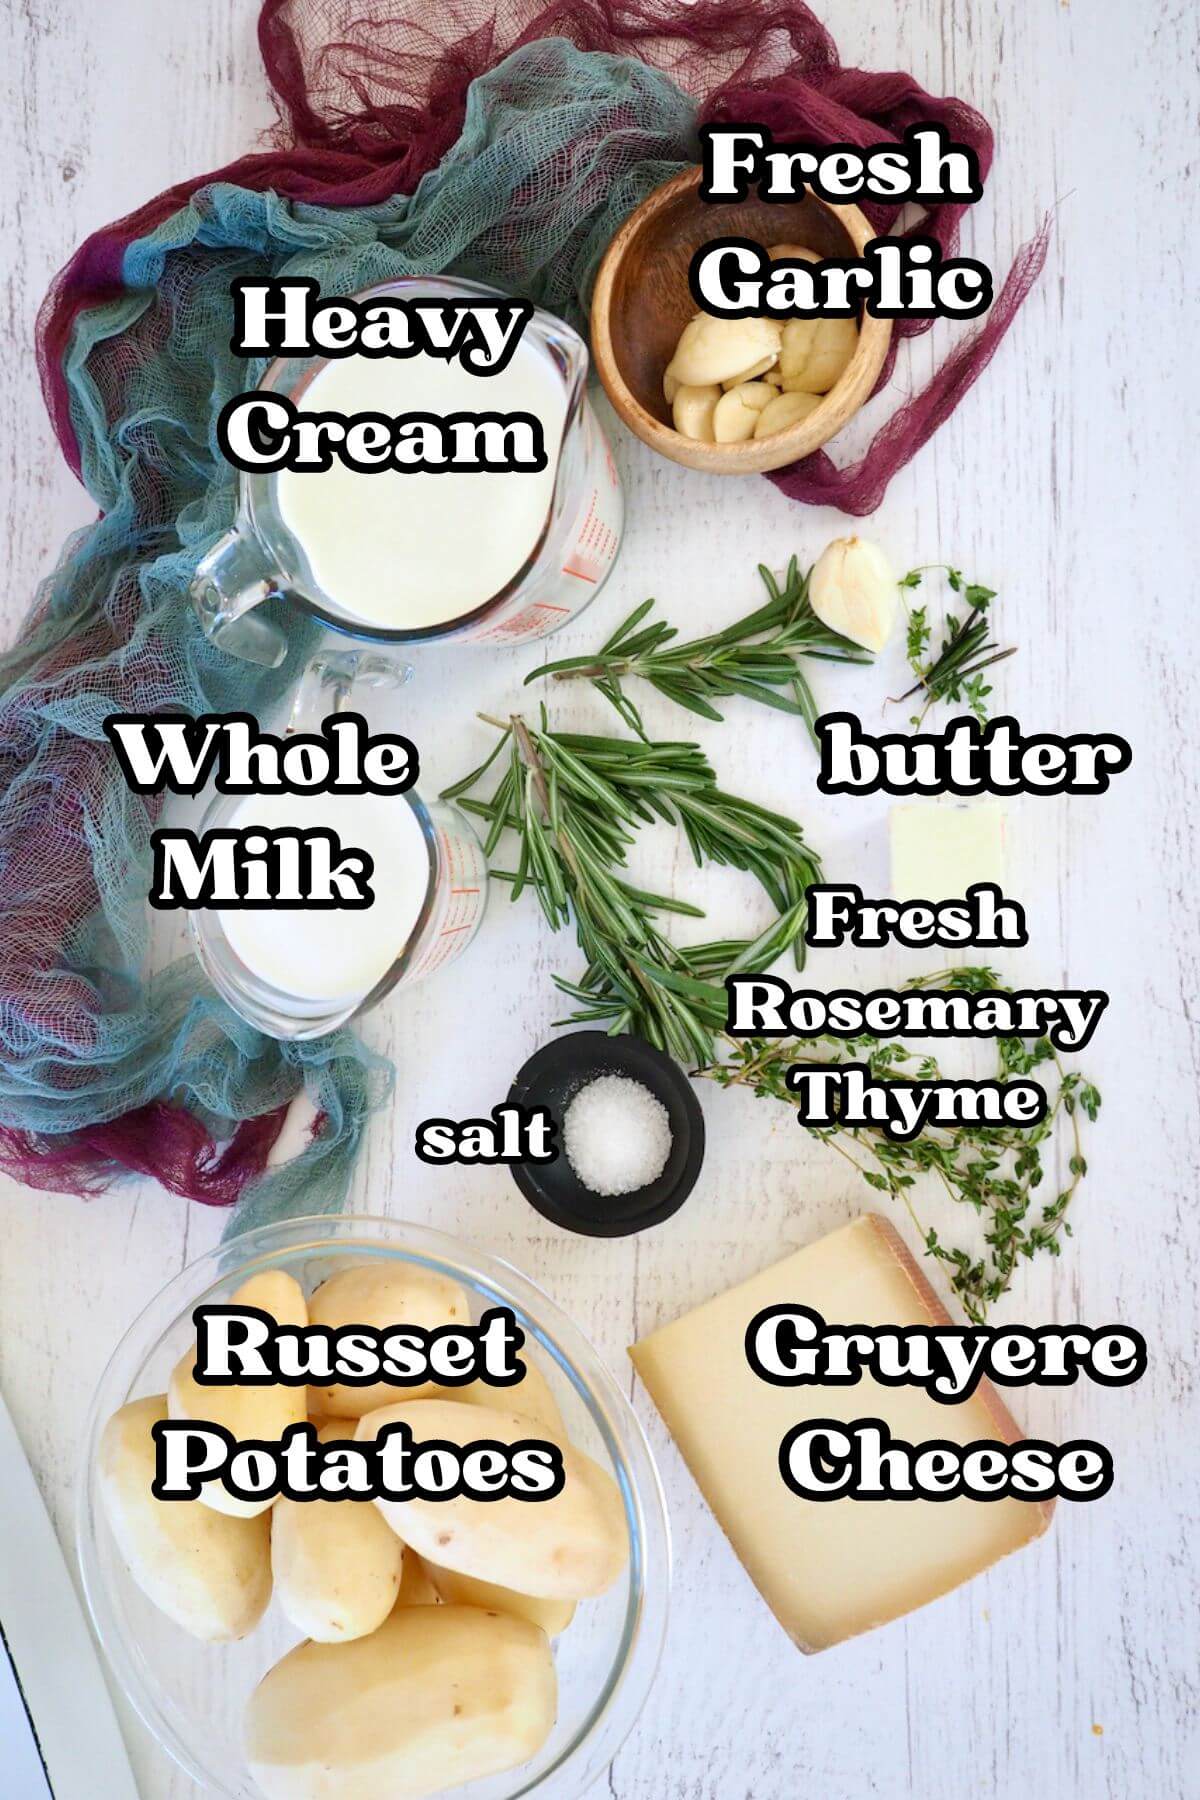 Labeled ingredients for potatoes dauphinoise.